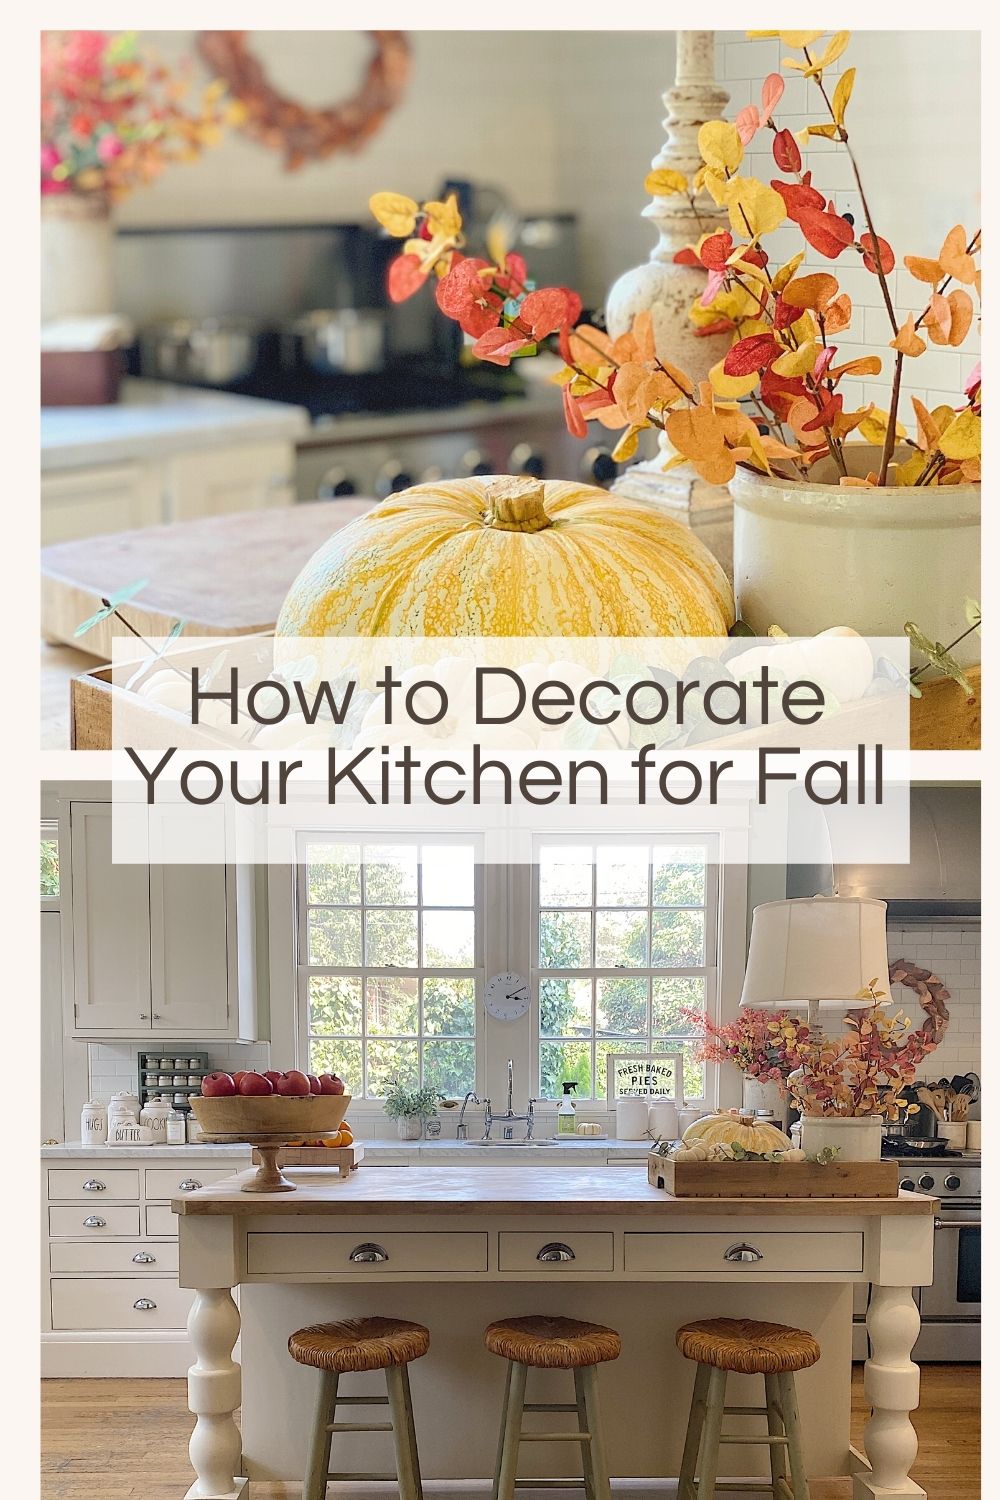 I love adding fall cozy kitchen decor to our home. These gorgeous foliage greens add so much color and beauty to our kitchen.